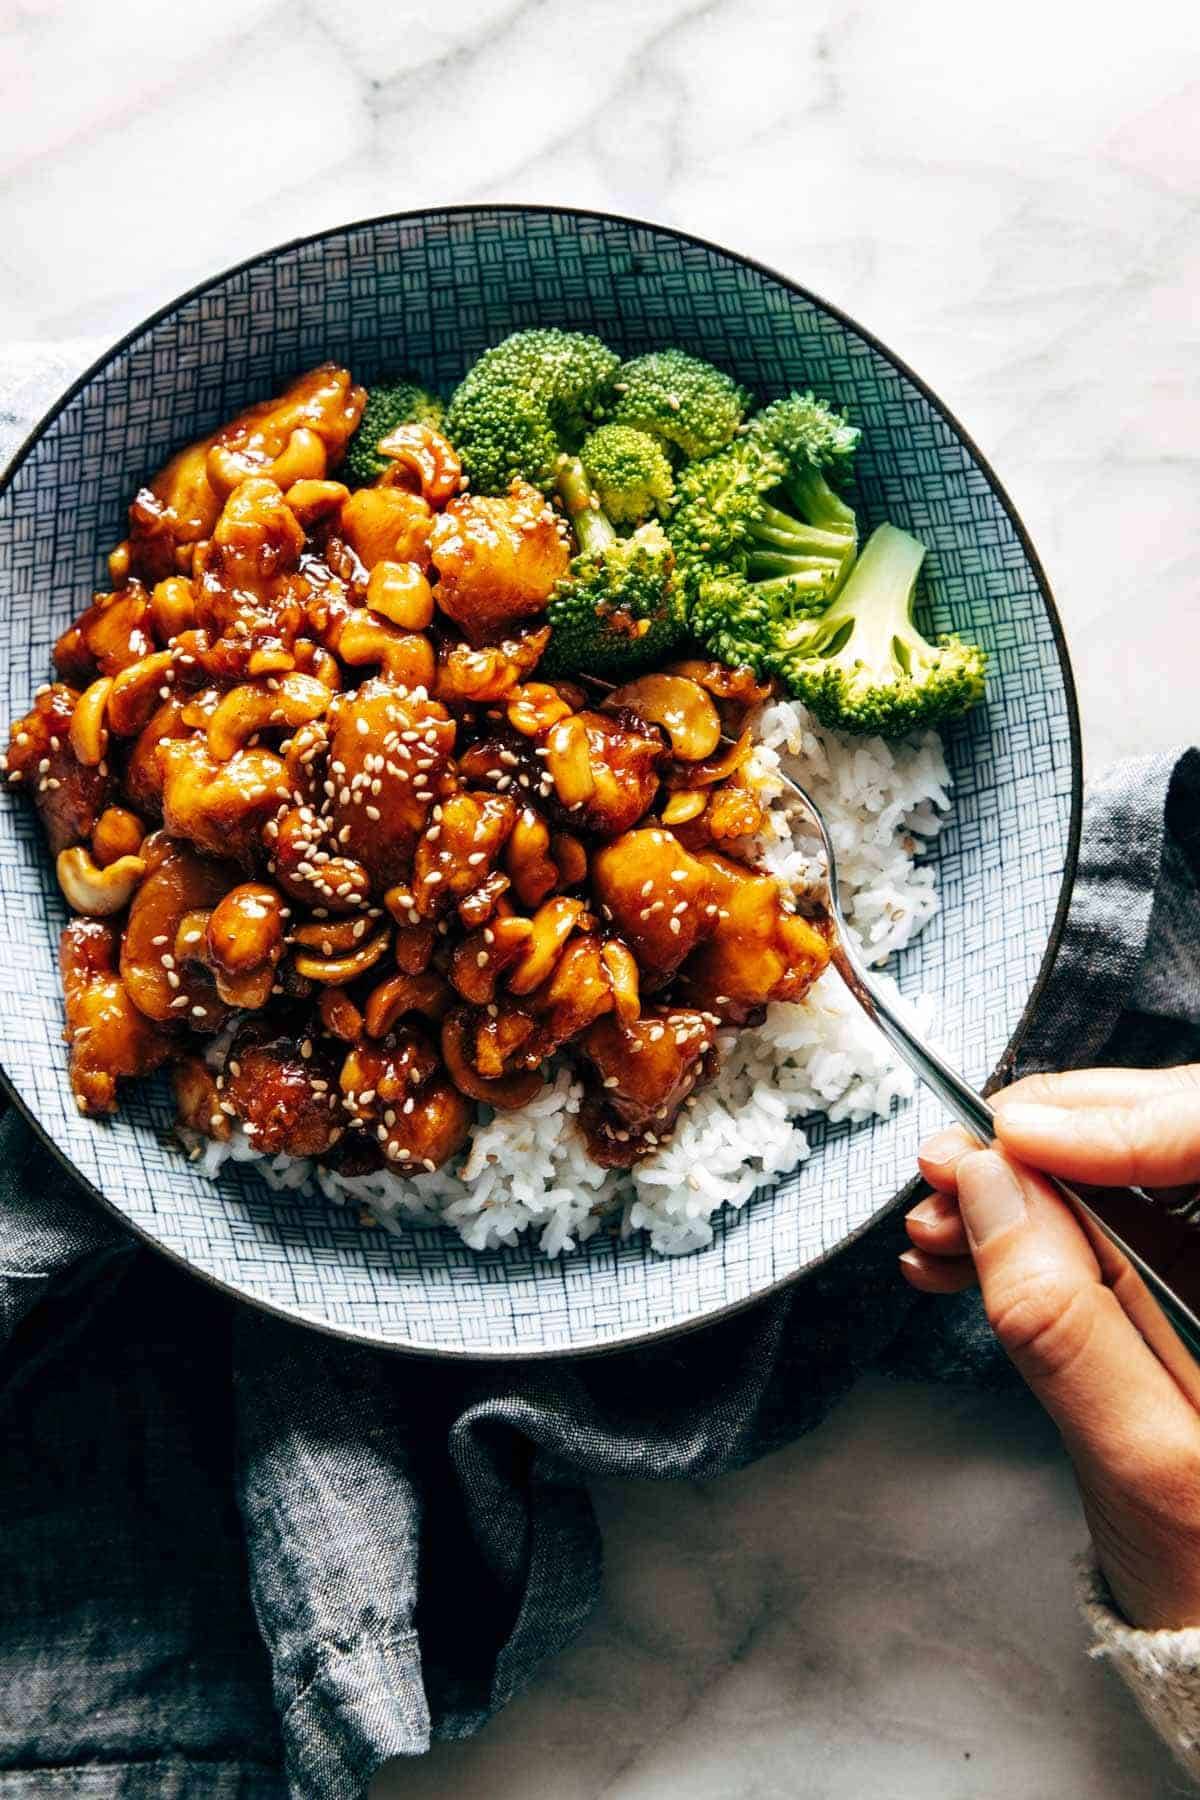 Cashew chicken in a bowl with rice and broccoli.